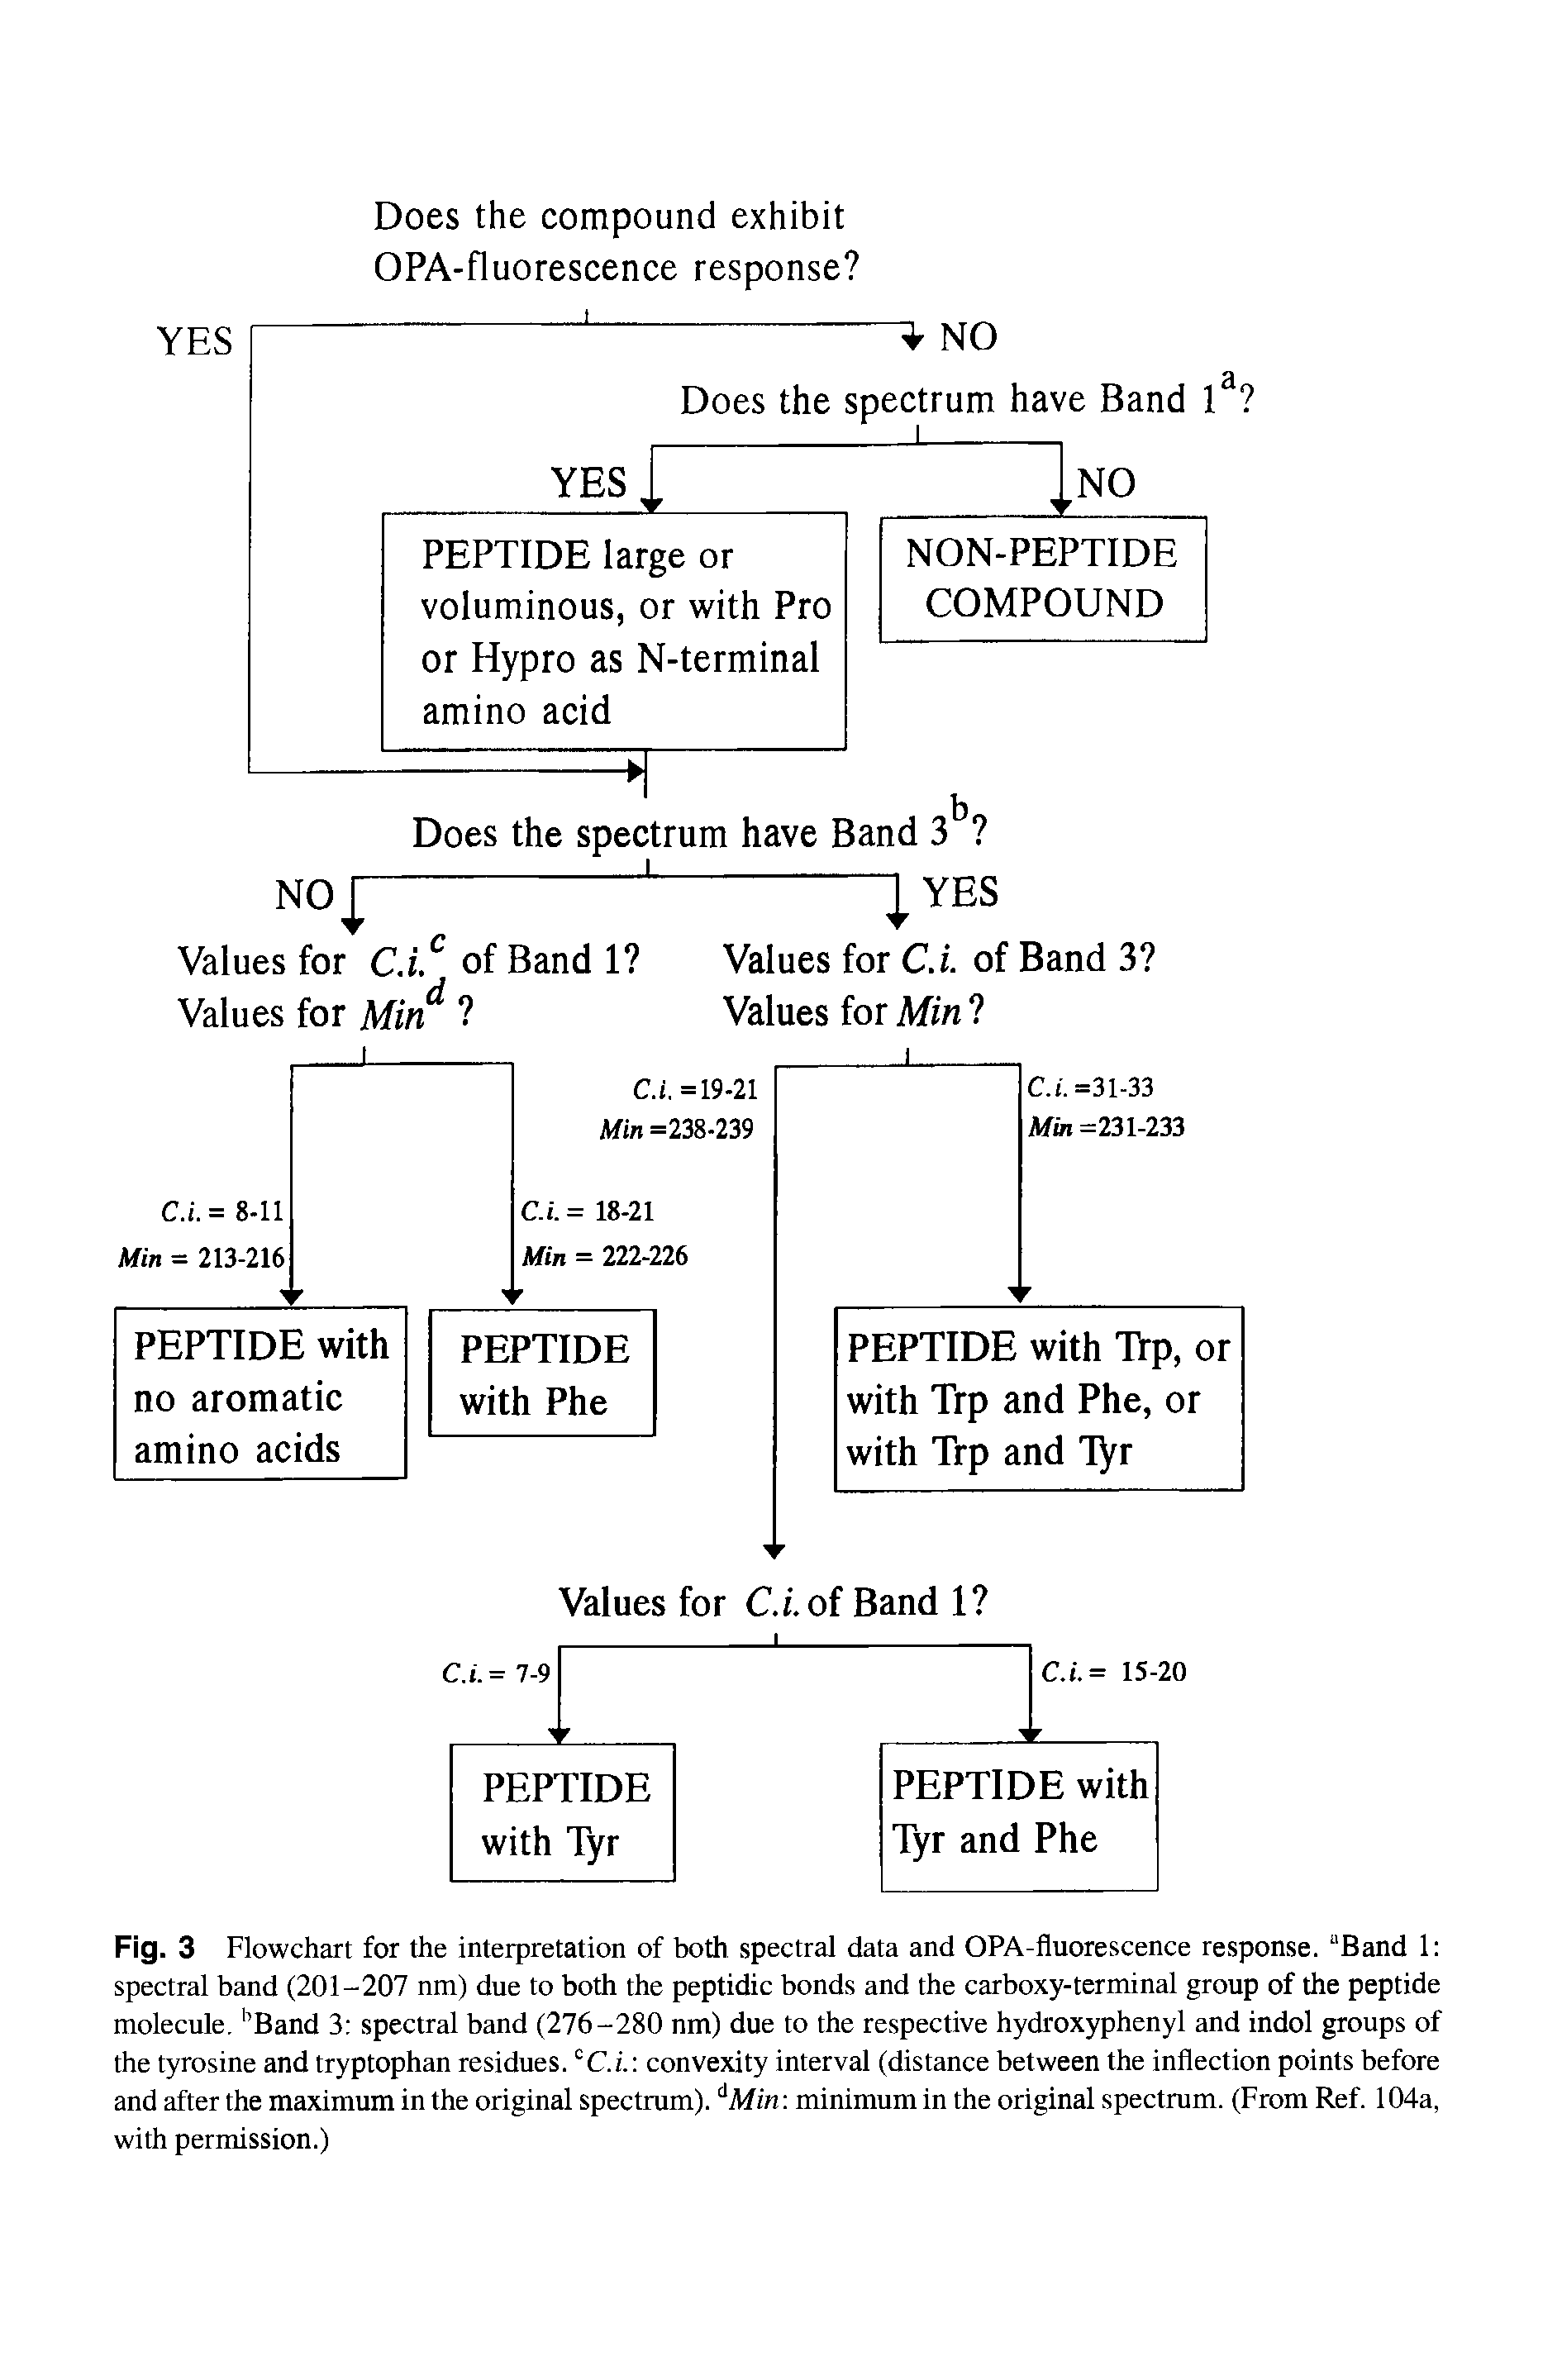 Fig. 3 Flowchart for the interpretation of both spectral data and OPA-fluorescence response. Band 1 spectral band (201-207 nm) due to both the peptidic bonds and the carboxy-terminal group of the peptide molecule. Band 3 spectral band (276-280 nm) due to the respective hydroxyphenyl and indol groups of the tyrosine and tryptophan residues. cC.i. convexity interval (distance between the inflection points before and after the maximum in the original spectrum). dMiw minimum in the original spectrum. (From Ref. 104a, with permission.)...